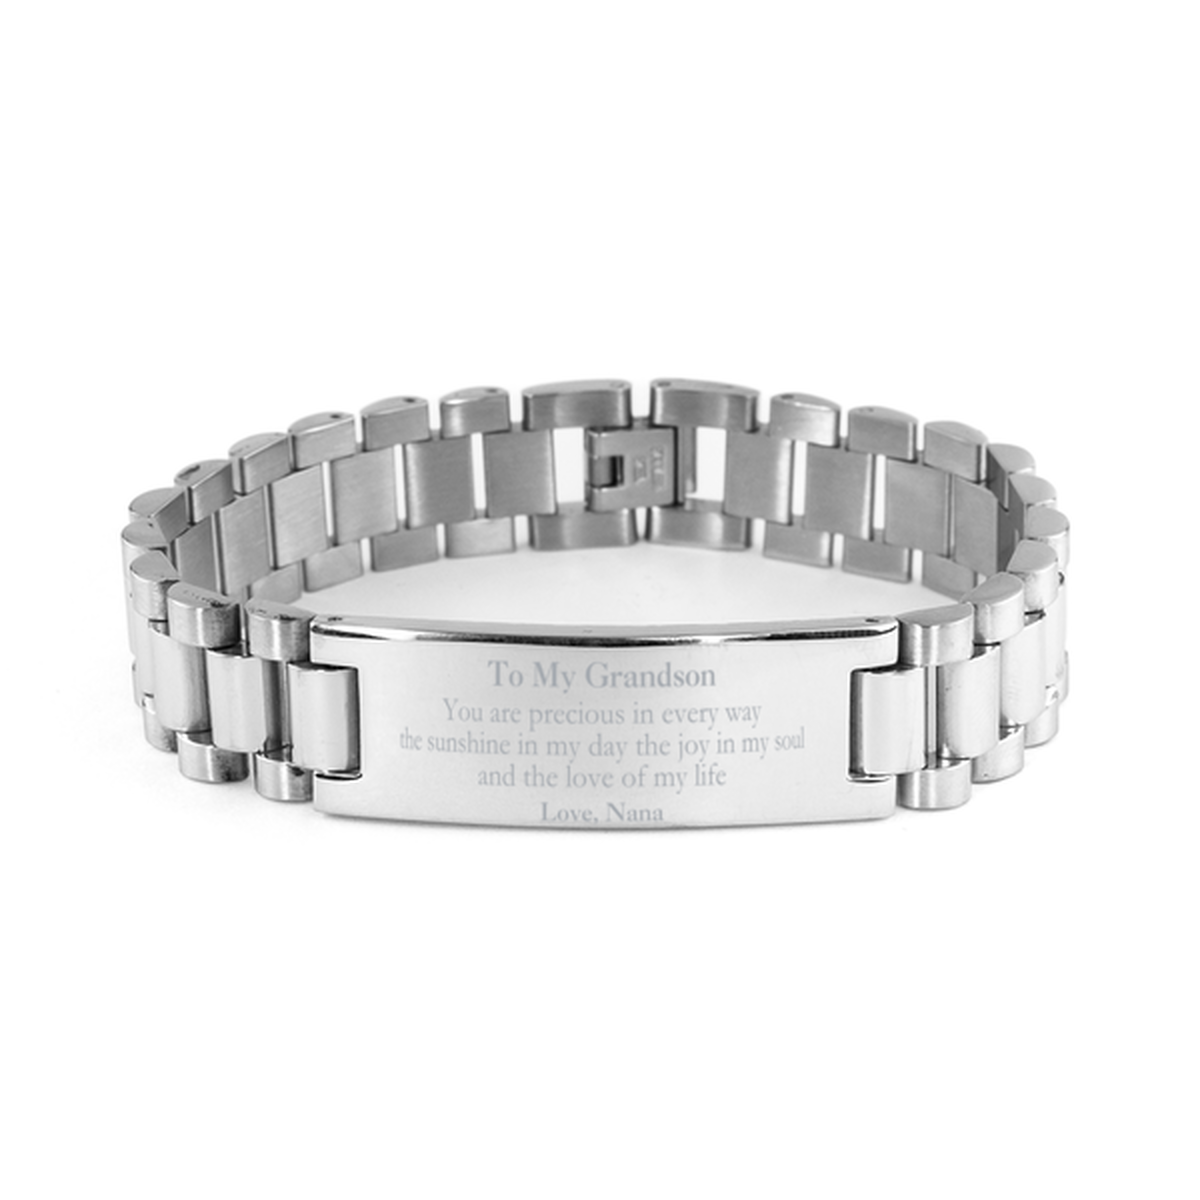 Graduation Gifts for Grandson Ladder Stainless Steel Bracelet Present from Nana, Christmas Grandson Birthday Gifts Grandson You are precious in every way the sunshine in my day. Love, Nana